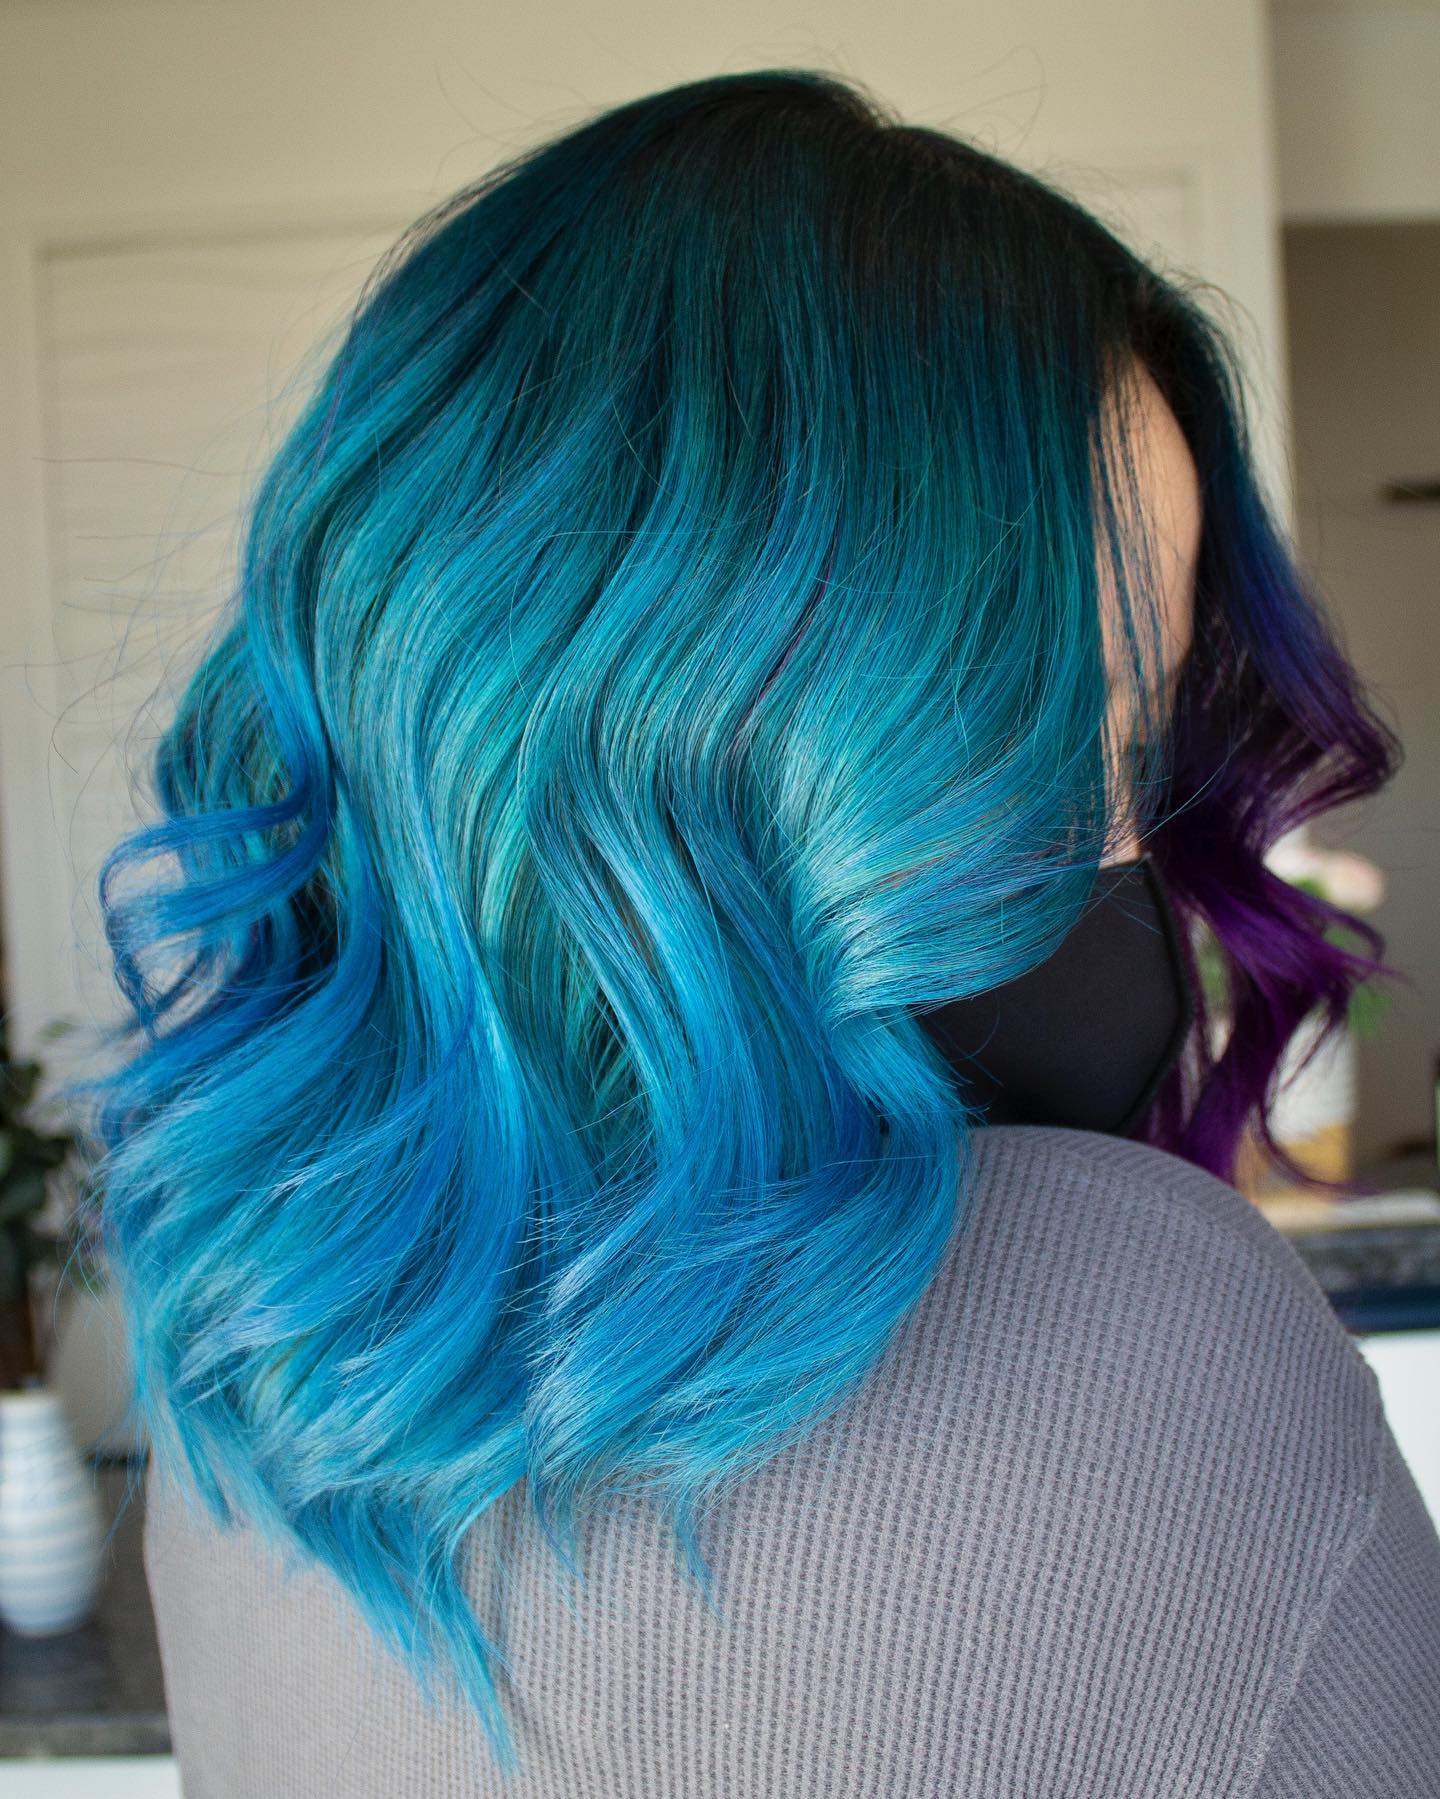 Aqua Turquoise Hair with Dark Roots